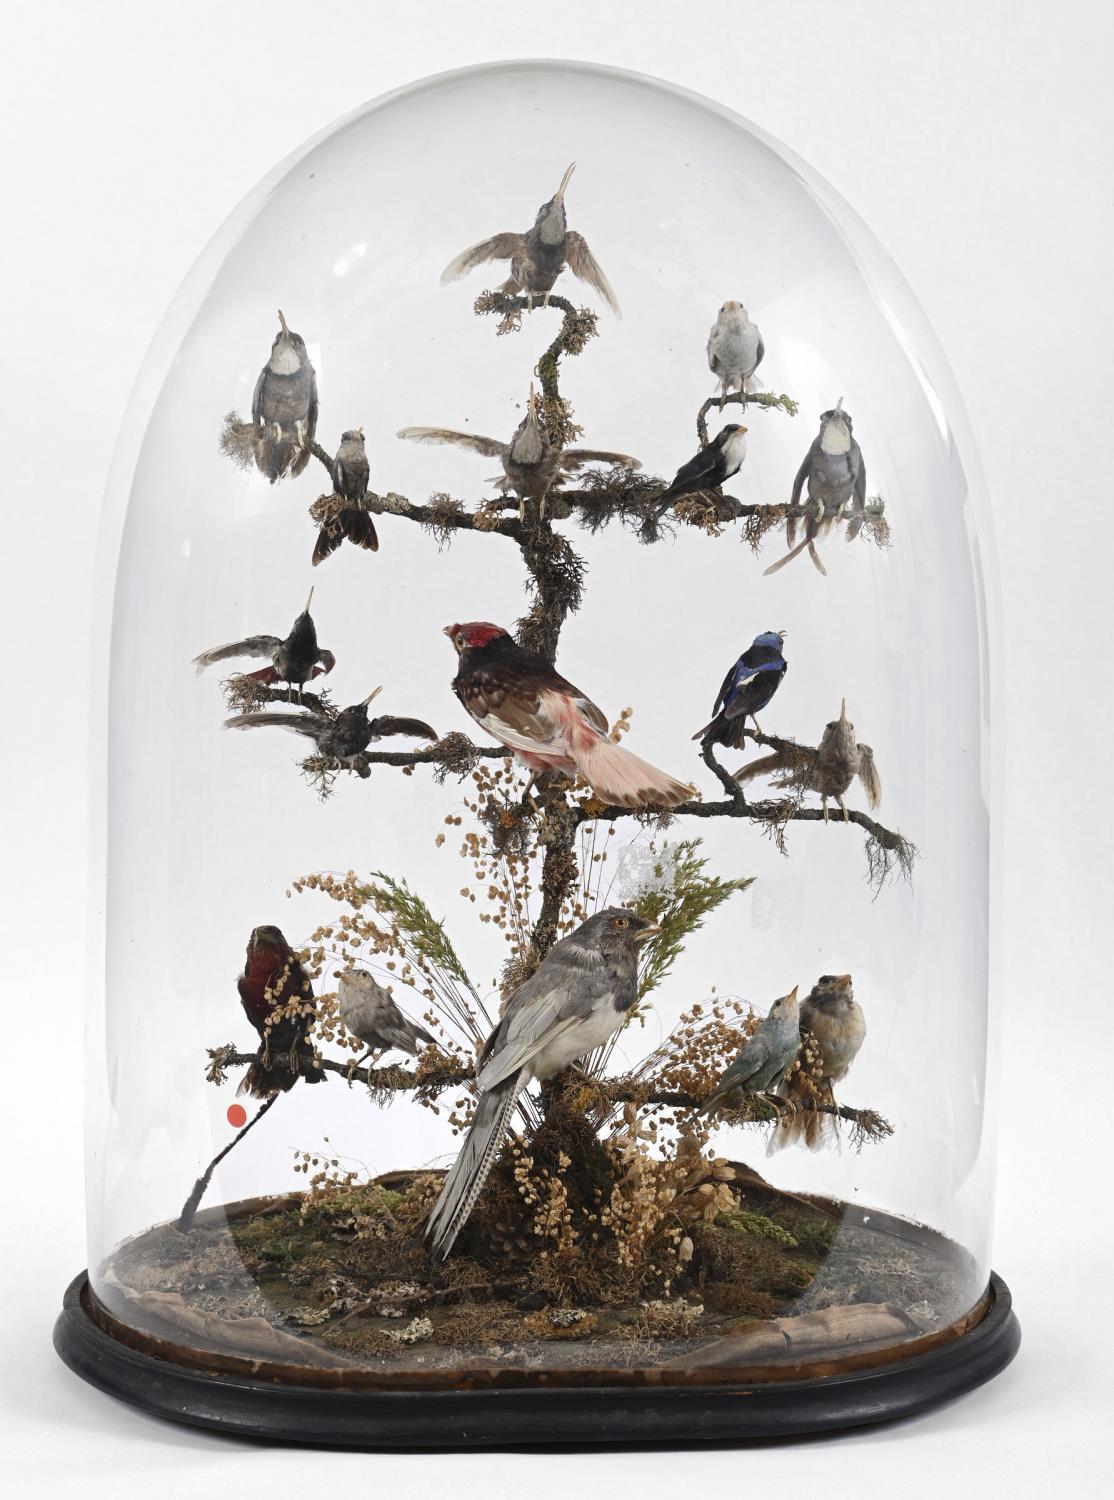 VICTORIAN CASED BIRDS & GLASS DOME - DIORAMA a large display of exotic stuffed birds including